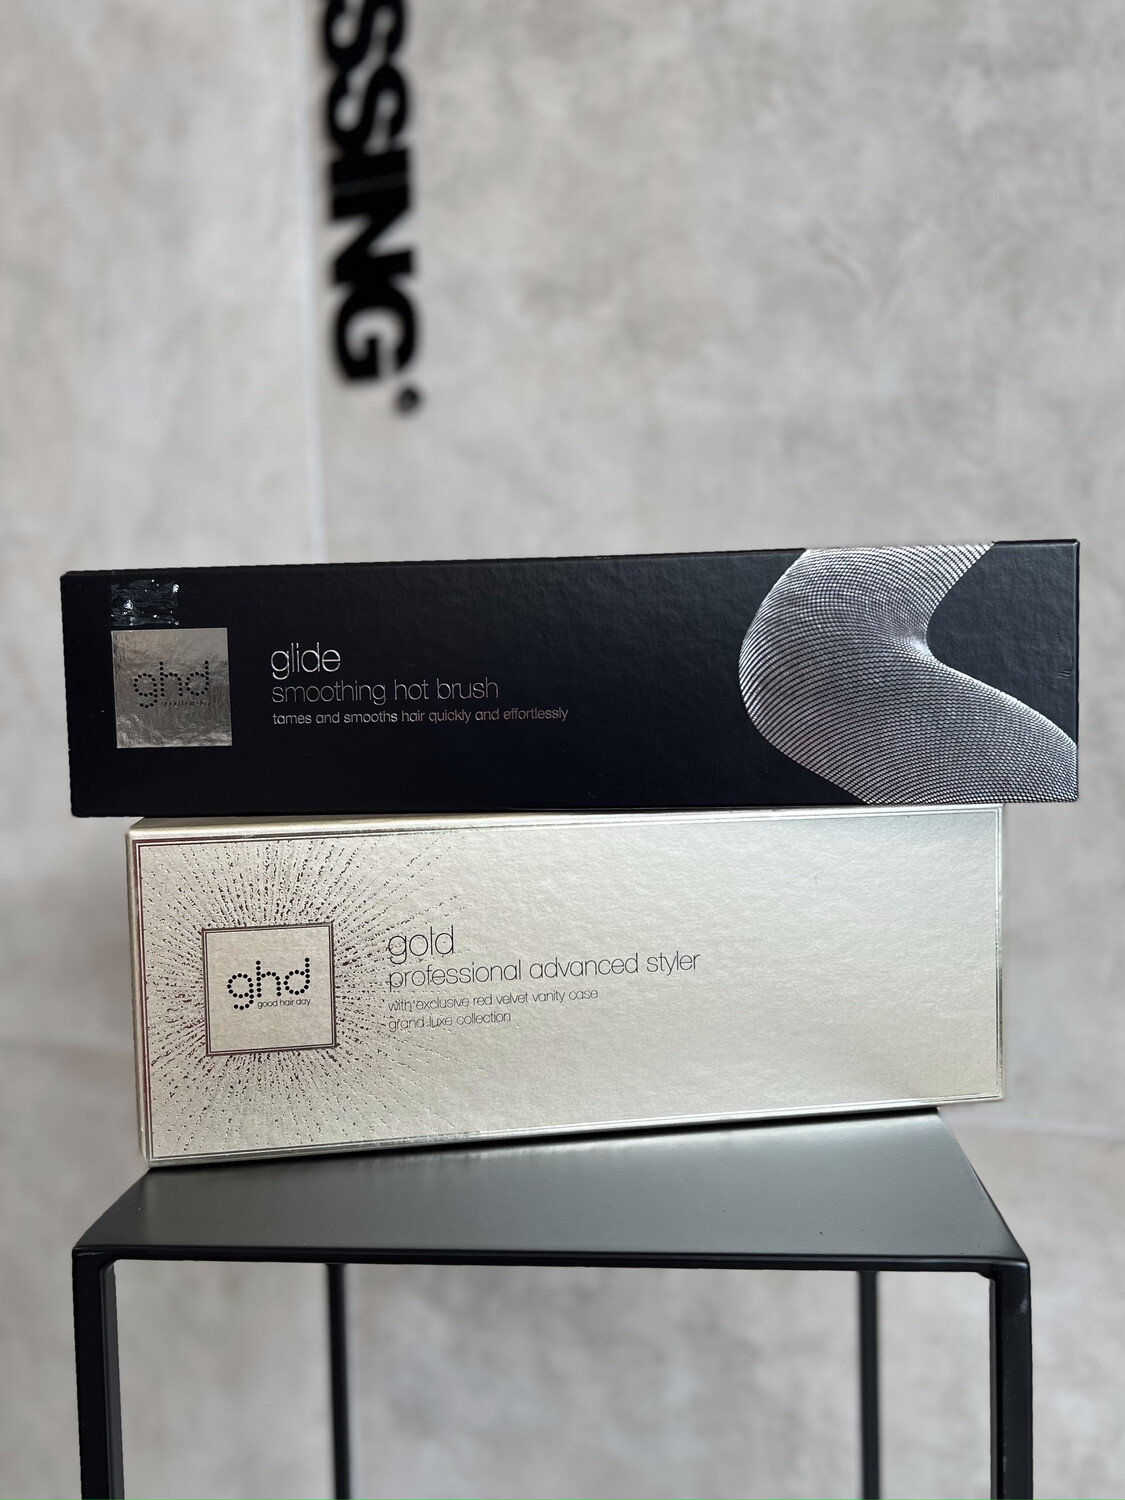 GHD gold® professional Grand Luxe Collection  & GHD Glide® Smoothing Hot Brush